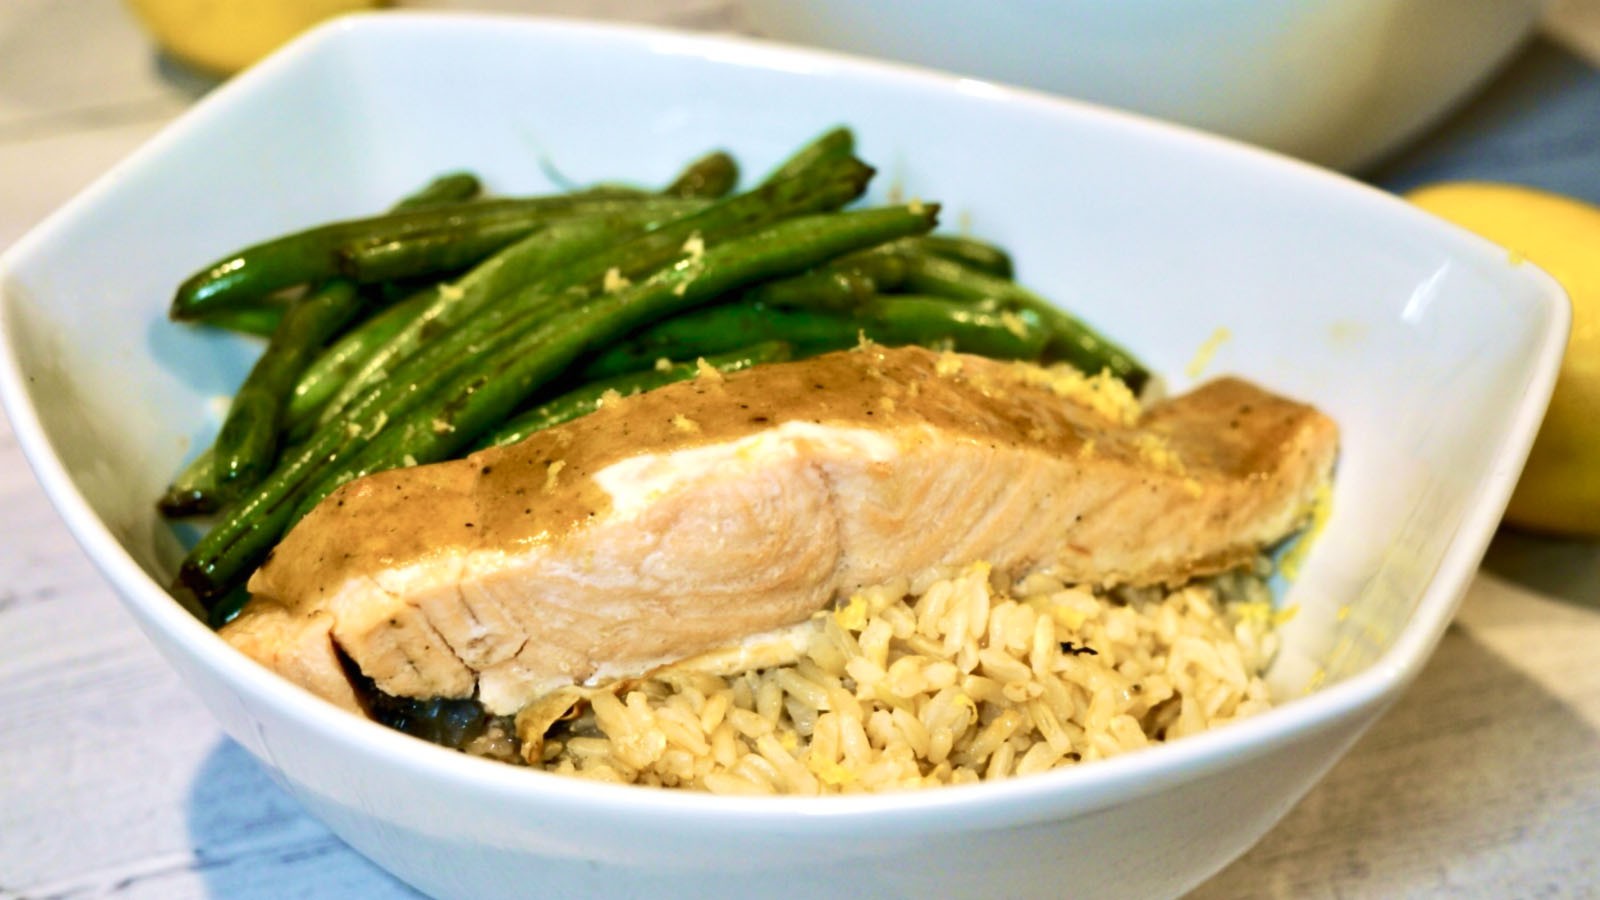 Image of Dijon Roasted Salmon with Balsamic Green Beans and Brown Rice